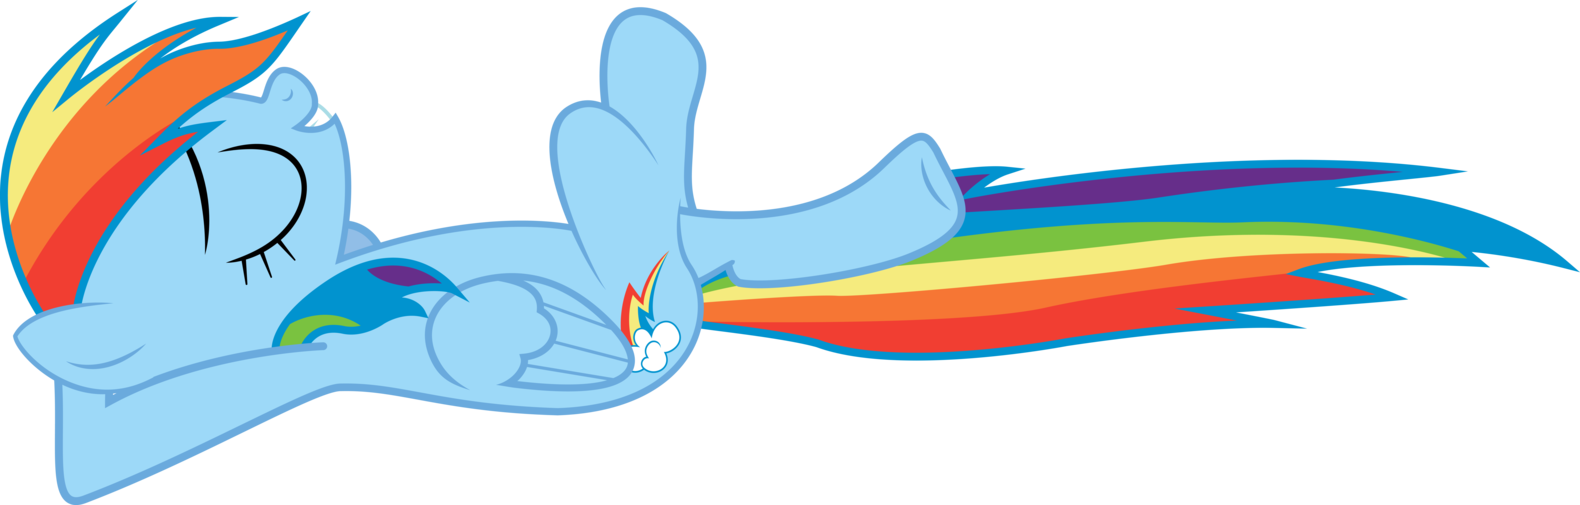 rainbow dash relaxed  1  by mrcabezon-d5